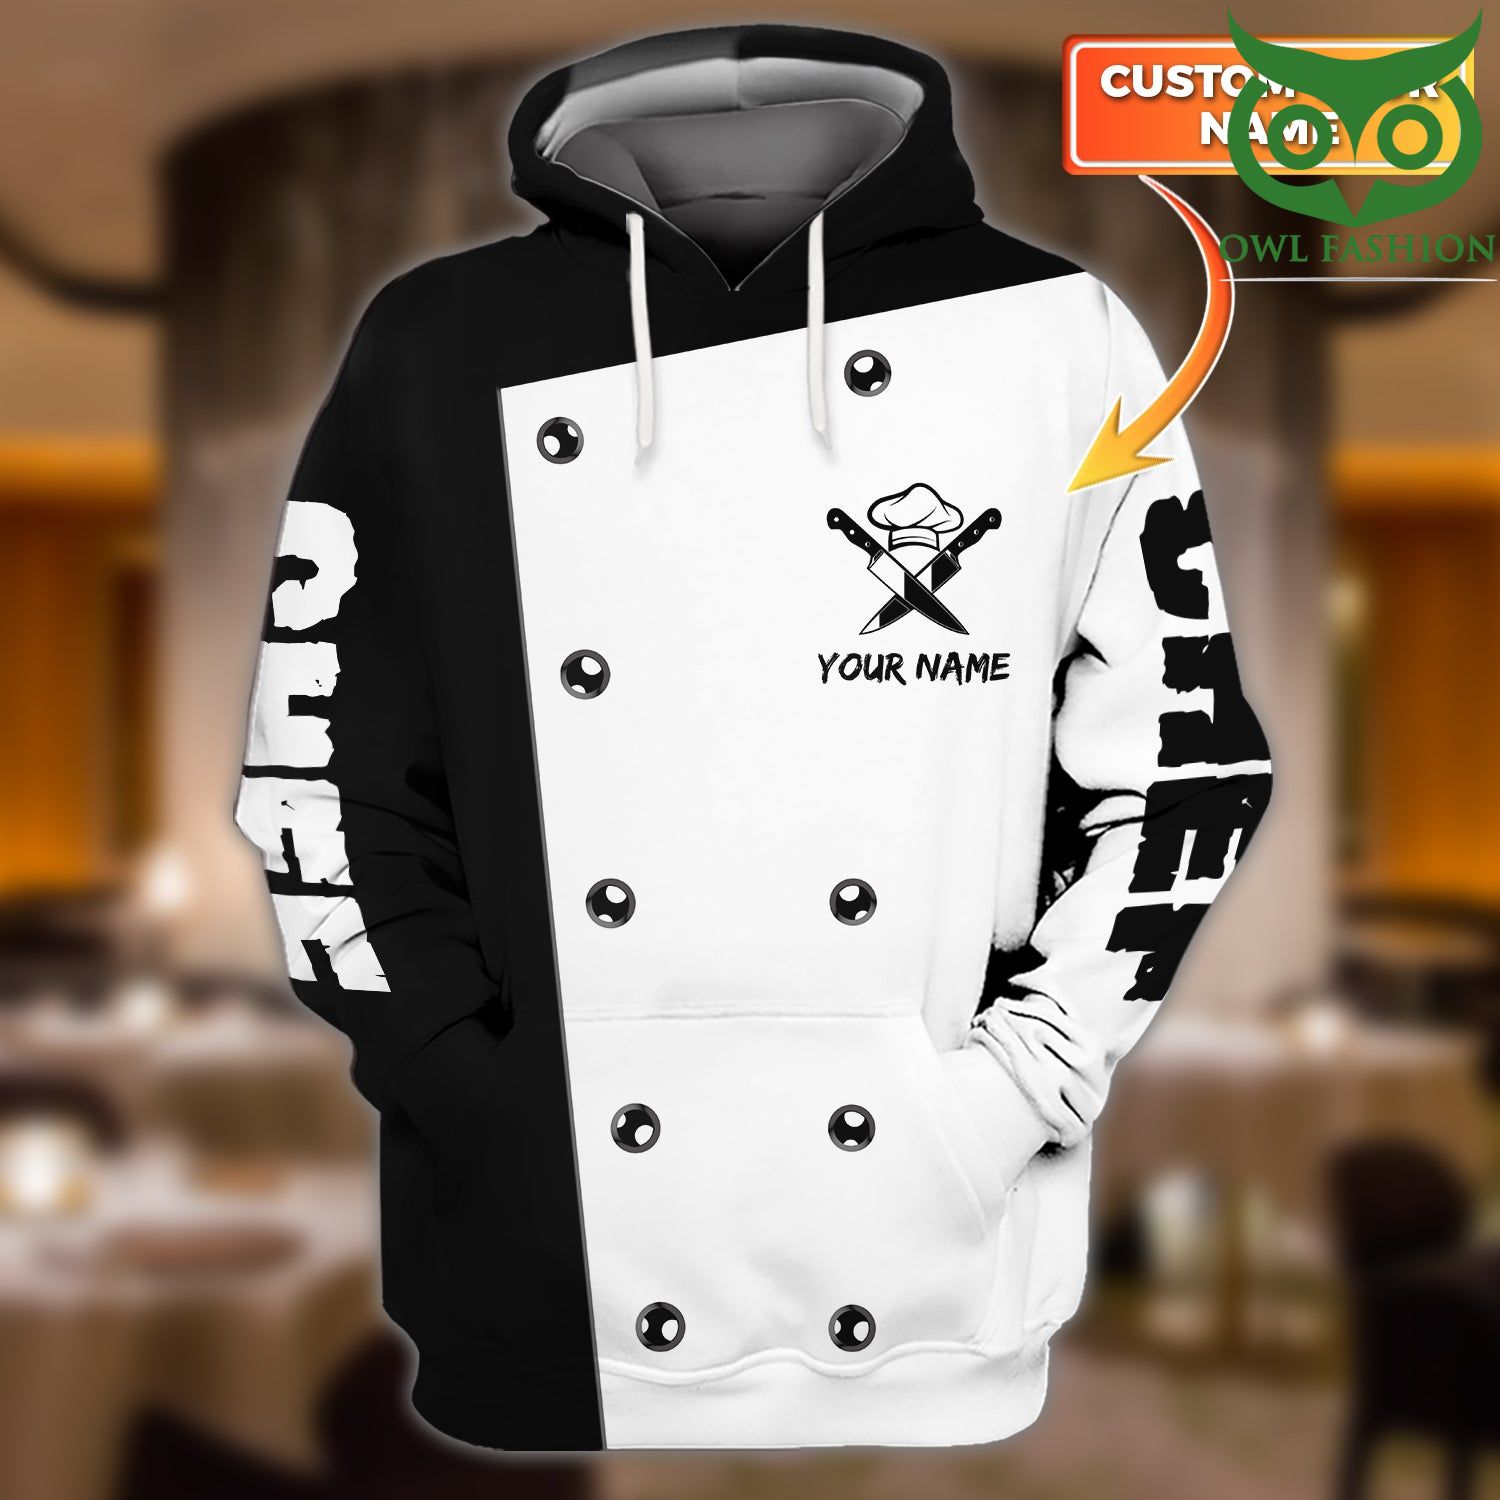 CHEF Costume black and white personalized 3D hoodie